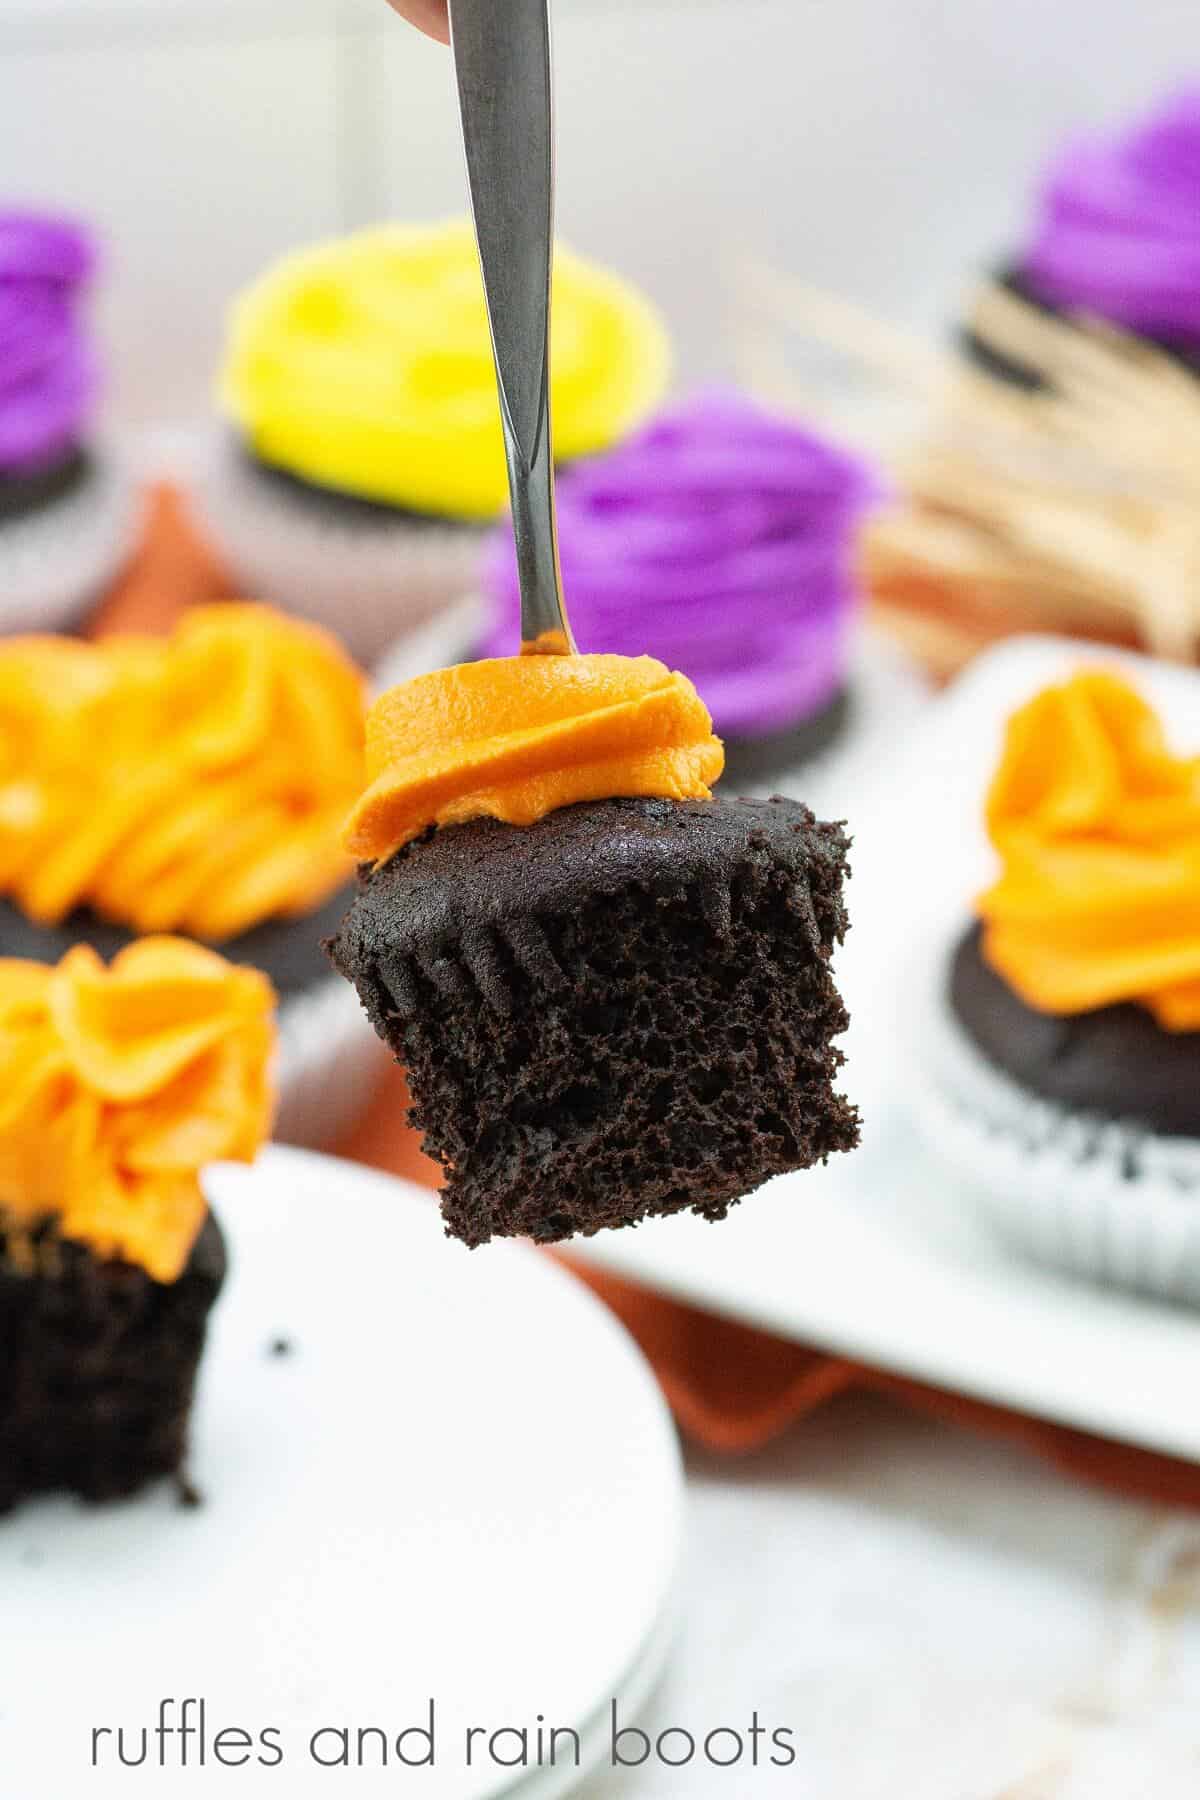 A fork with a bite of the orange frosted Hocus Pocus cupcake with several other cupcakes in the background against a white marble background.